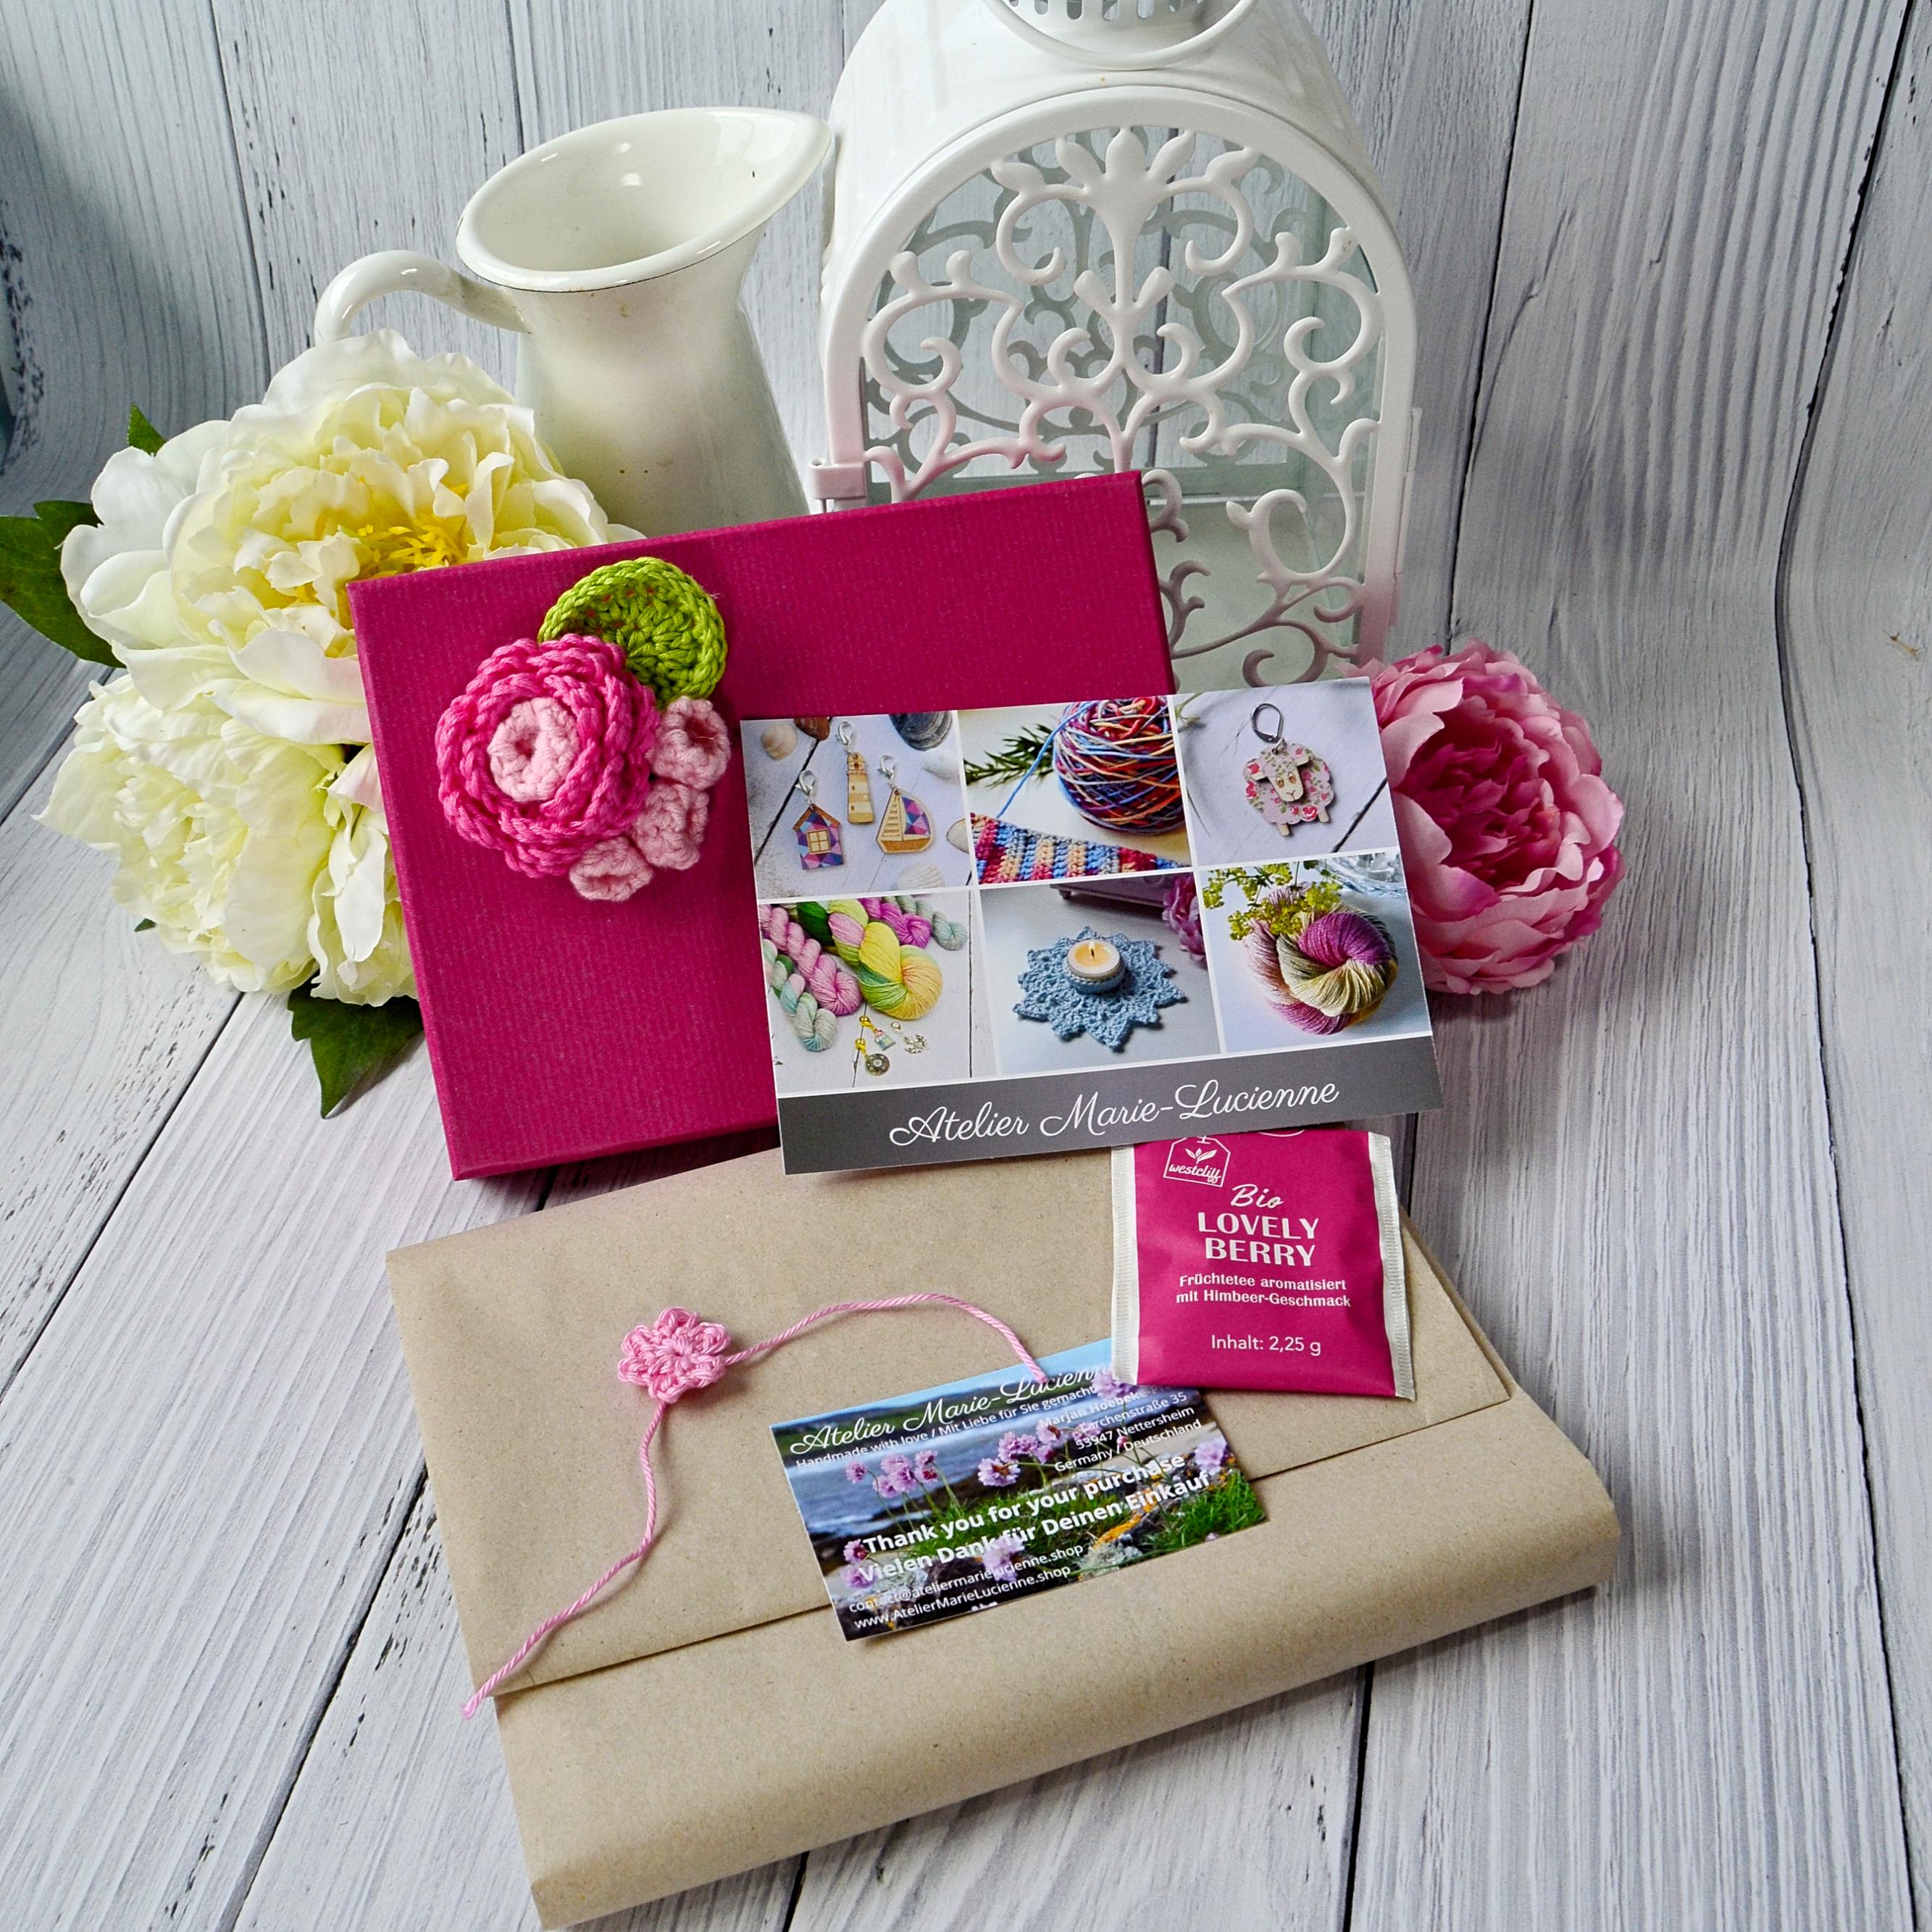 Welcome gift pack in pink with contents not yet unwrapped in front of it